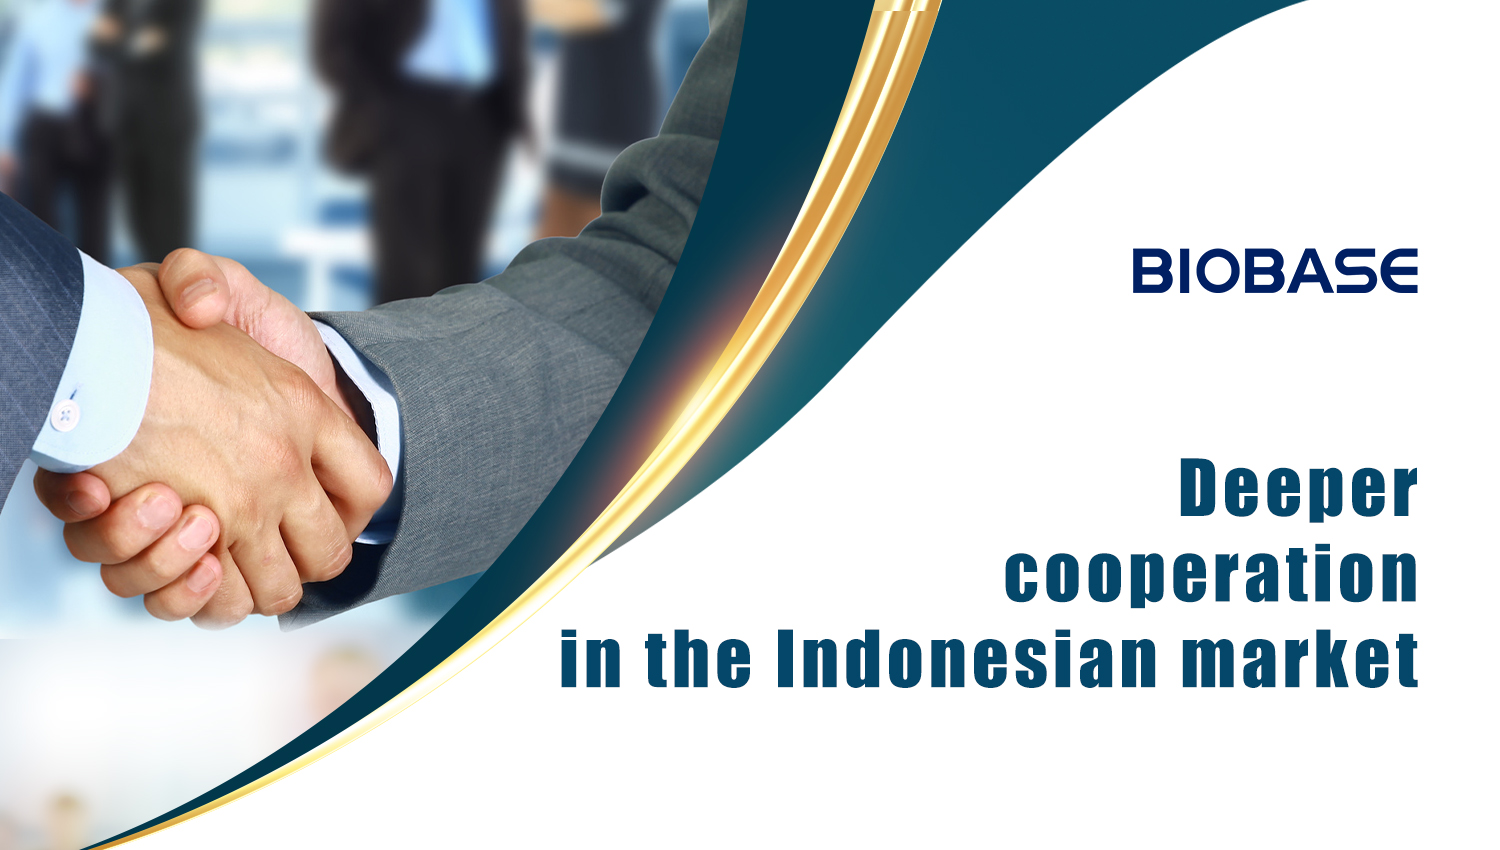 Deeper cooperation in the Indonesian market